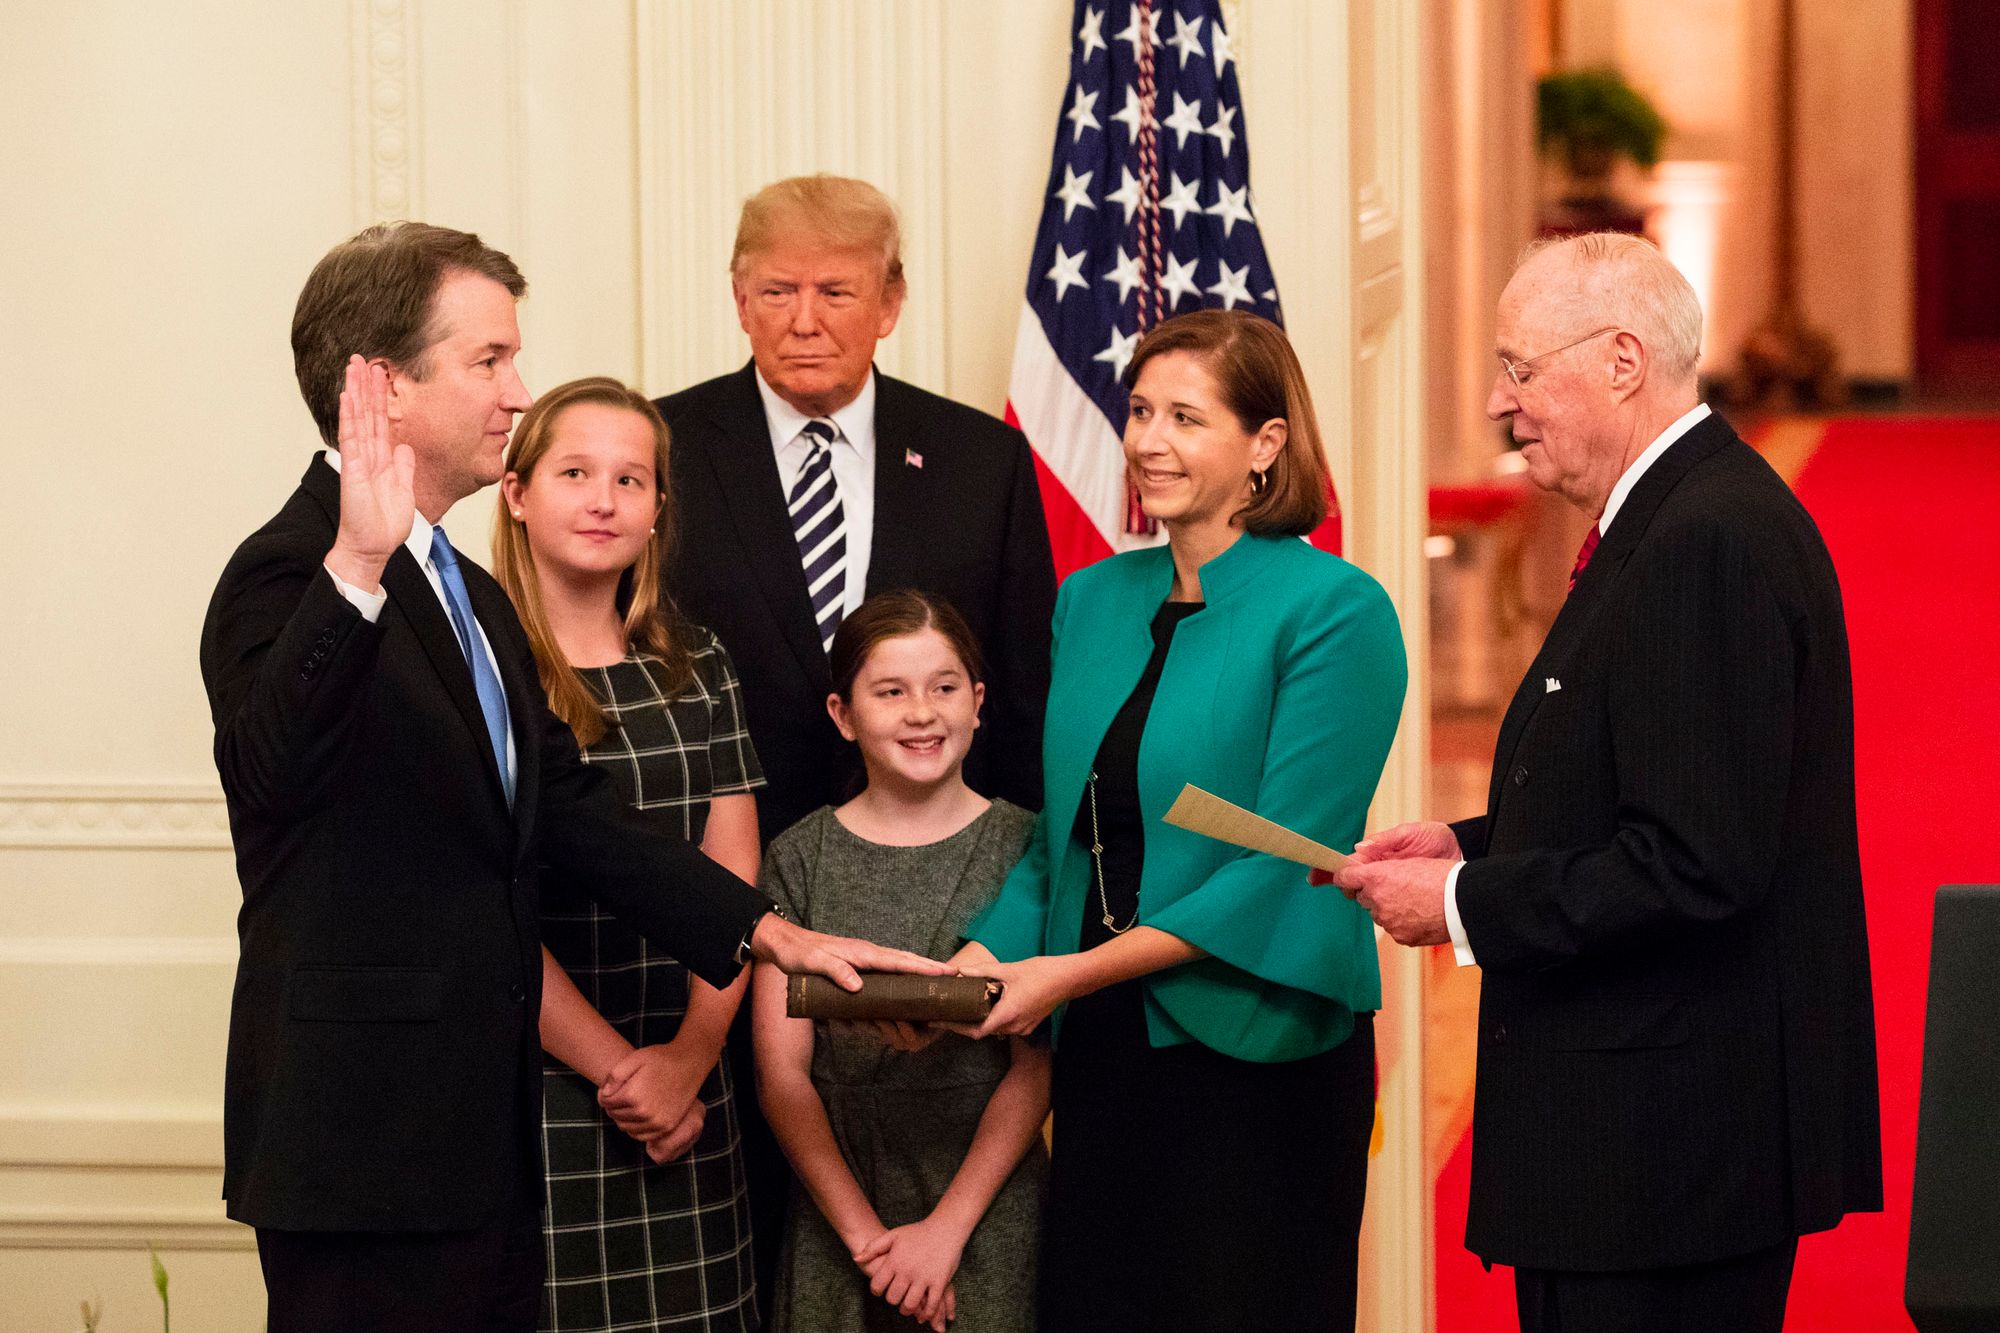 Justice Kavanaugh, who has been under threat, being sworn in with his family at the White House. Image: White House 